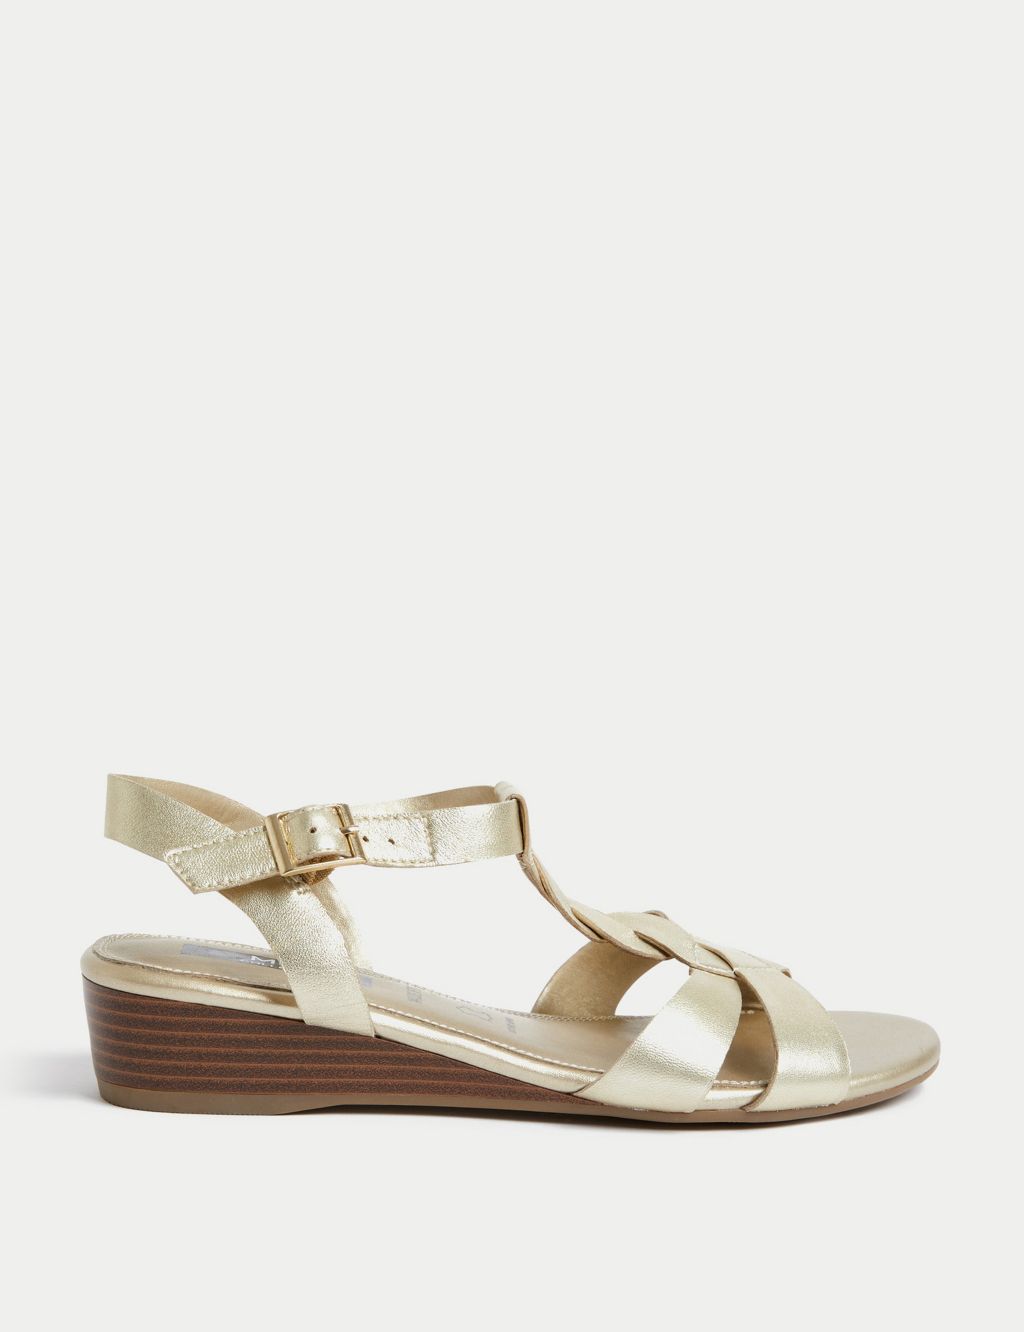 Wide Fit Leather Wedge Sandals image 1